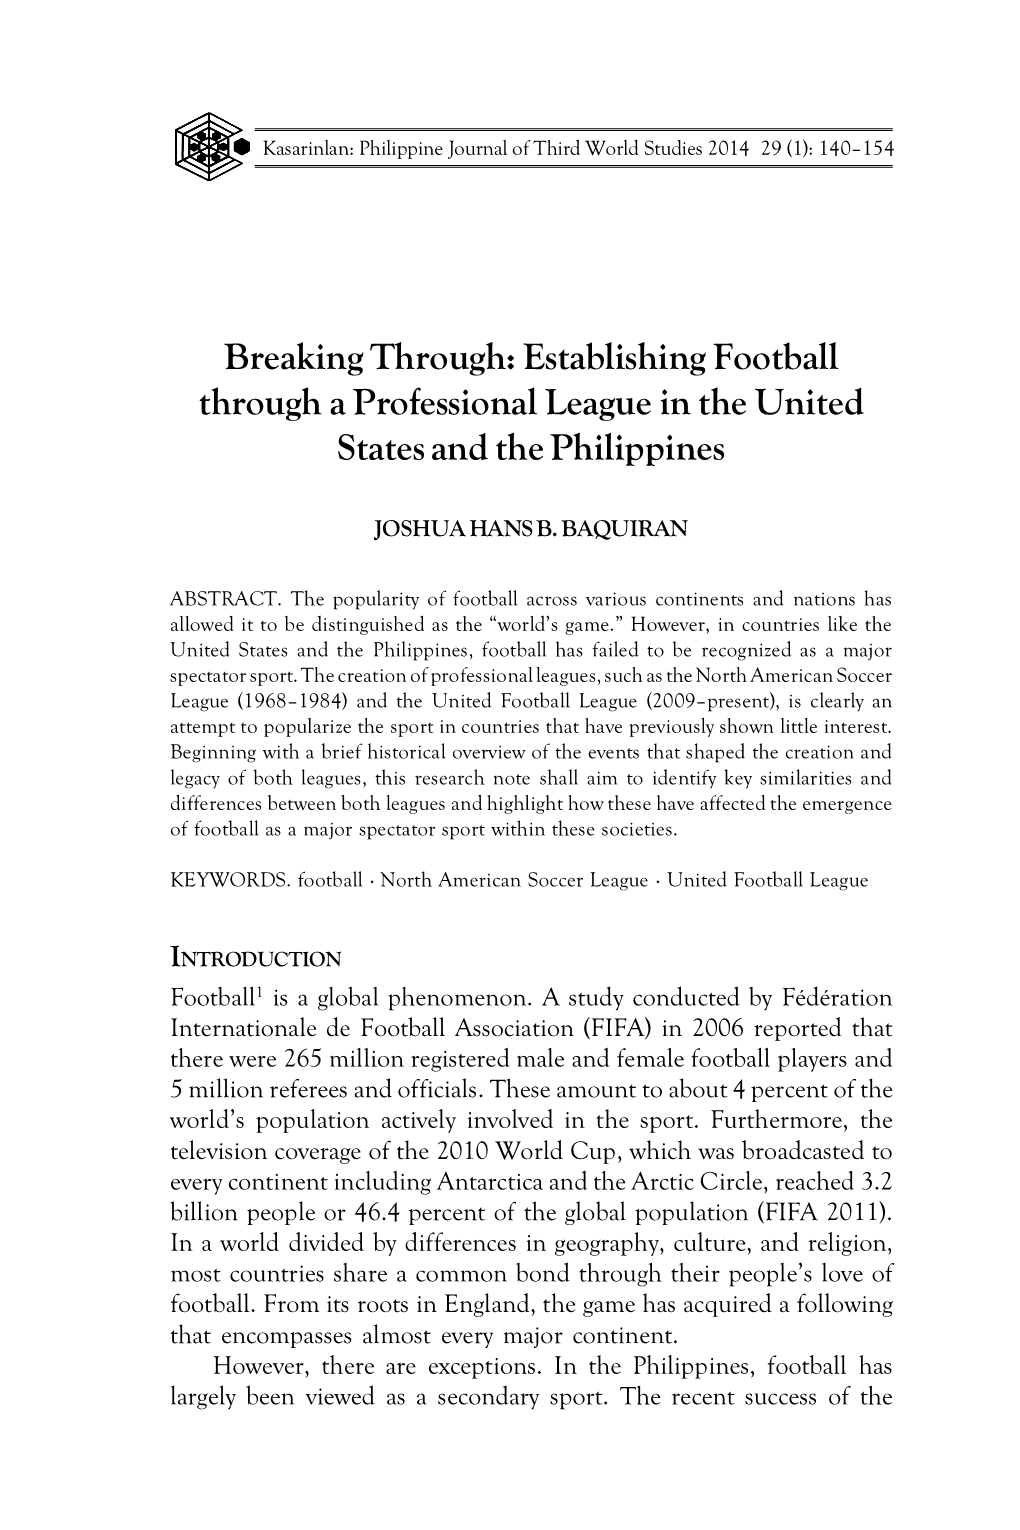 Establishing Football Through a Professional League in the United States and the Philippines